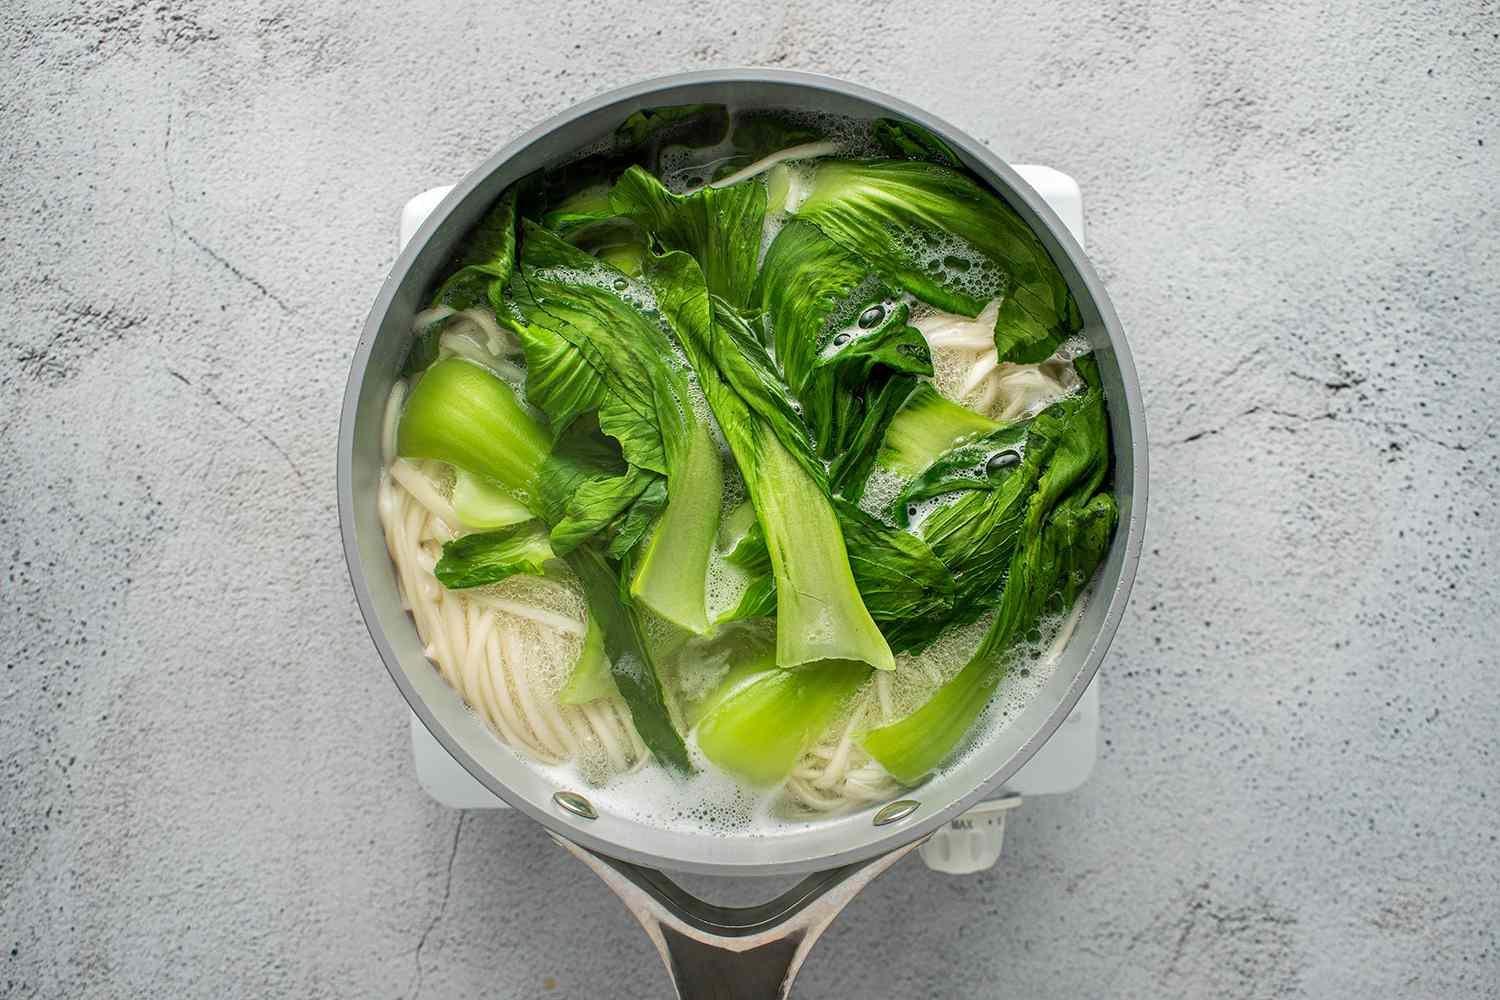 Noodles and bok choy being cooked in pot on a burner 